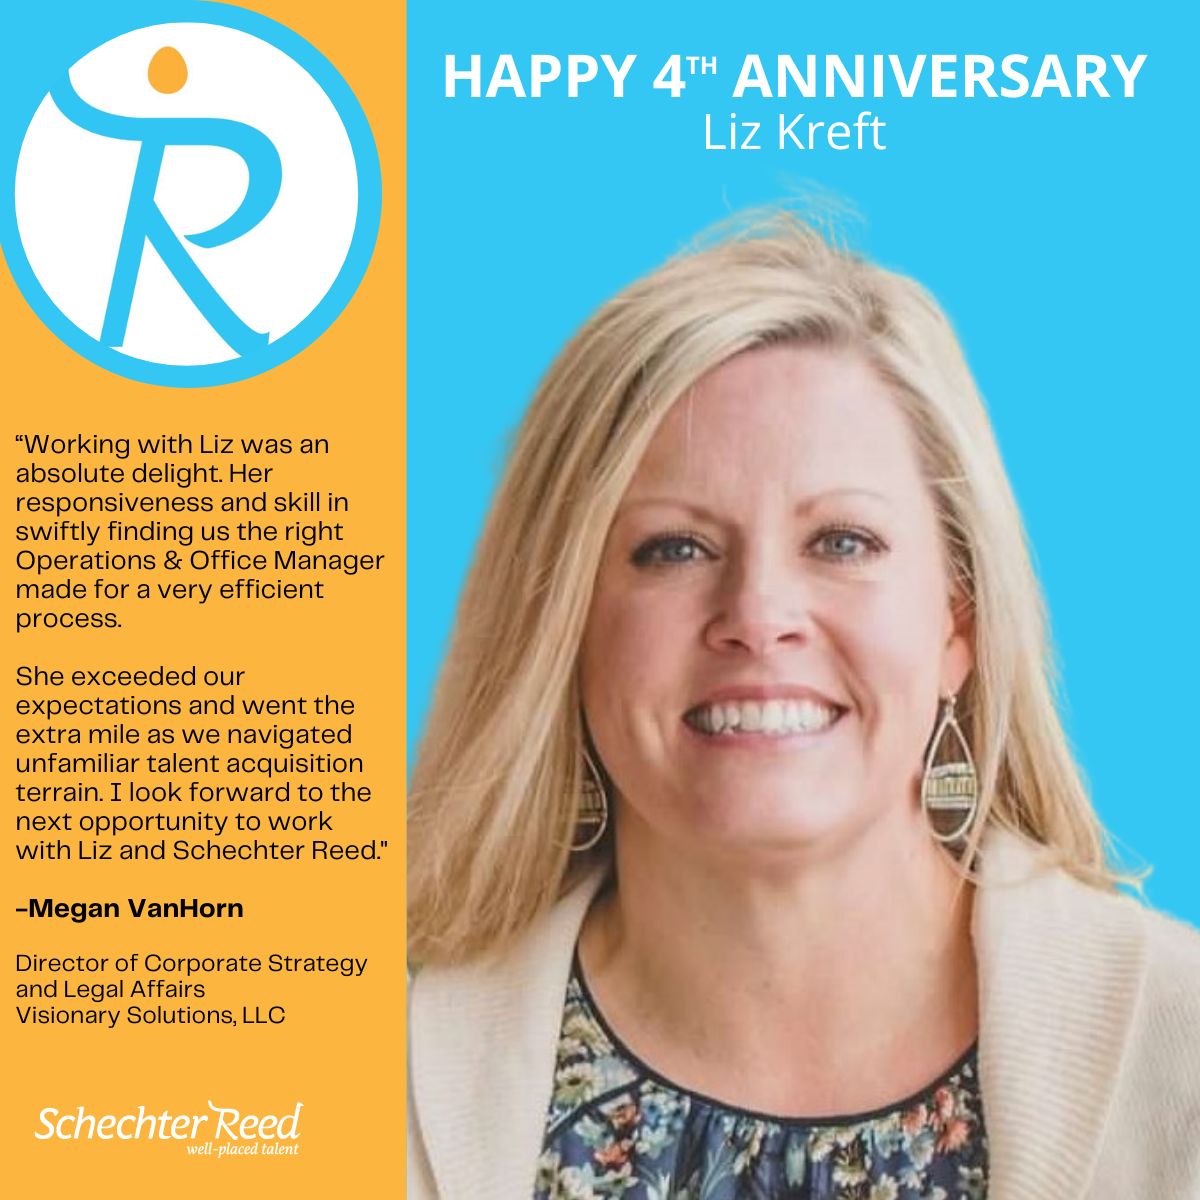 Liz Kreft featured on her 4 year anniversary with Schechter Reed. client testimonial adds credibility.